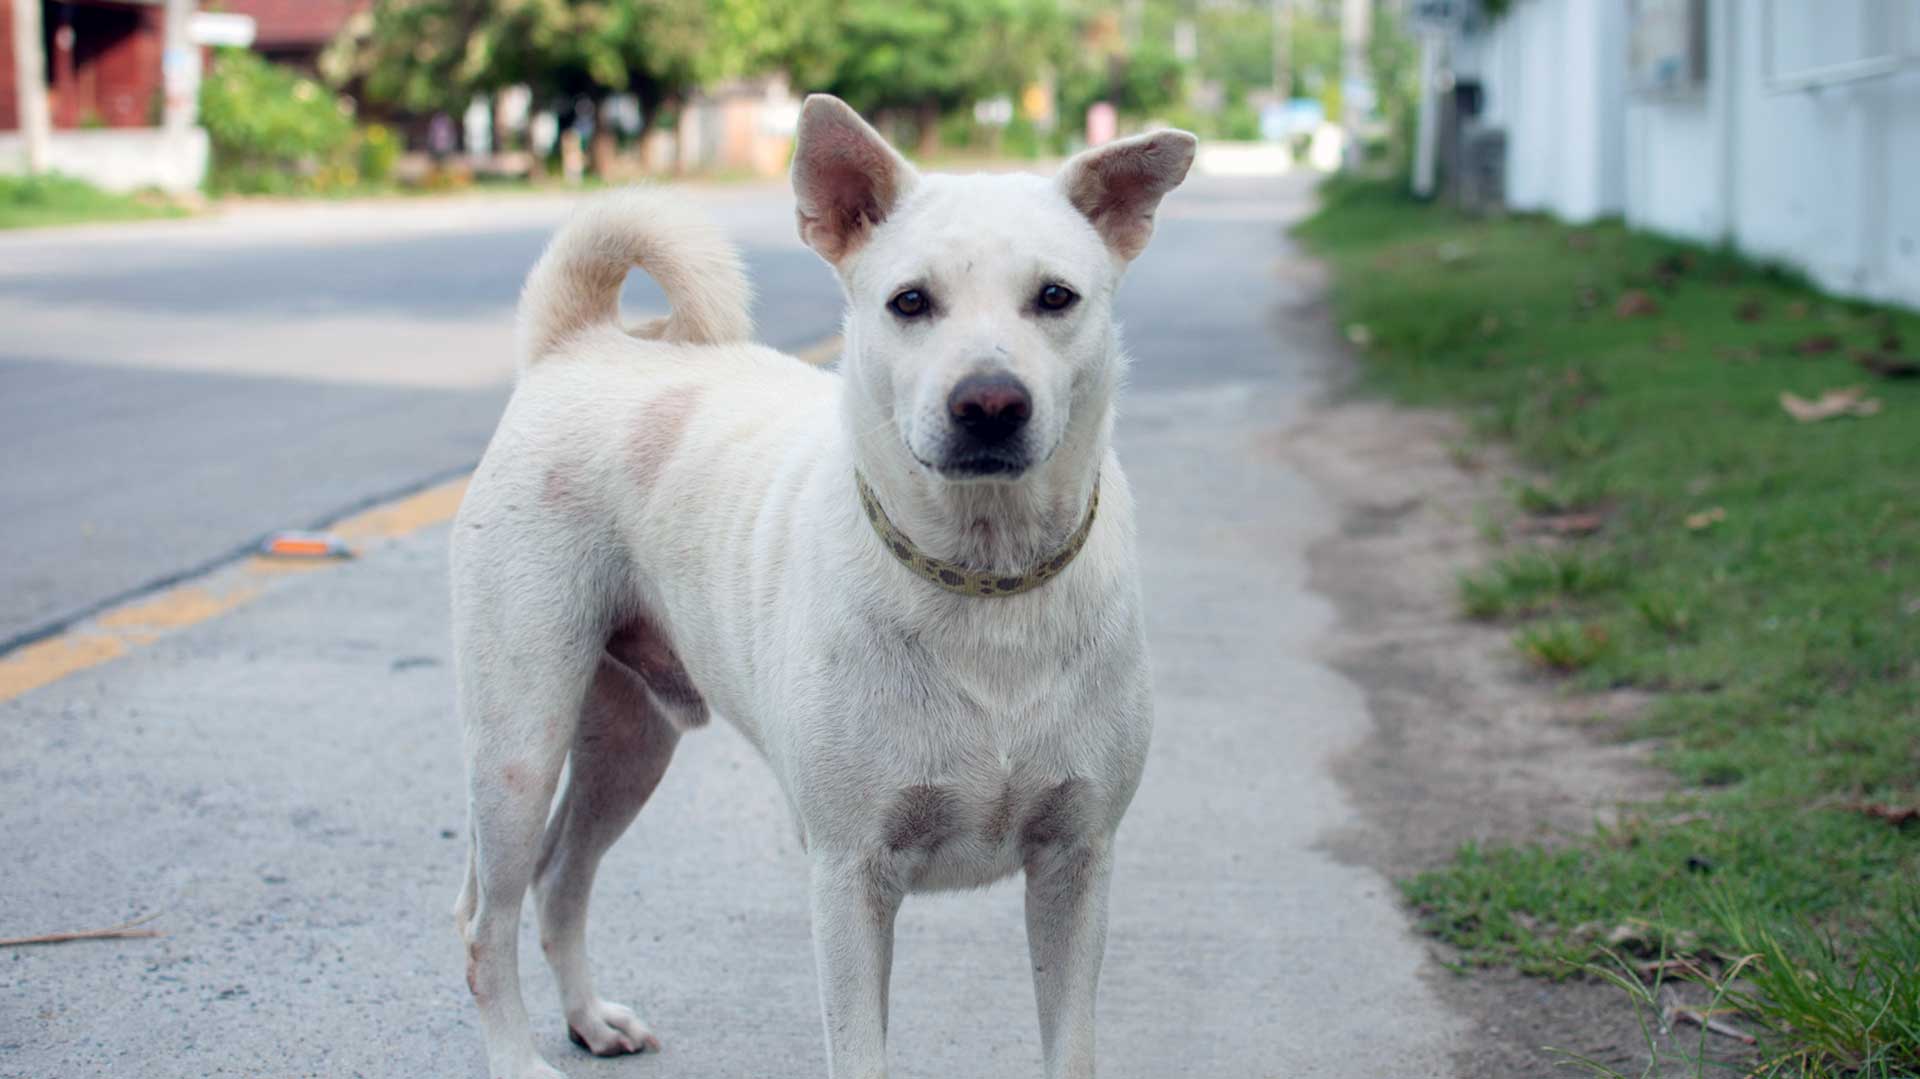 jindo is ill with infectious canine hepatitis